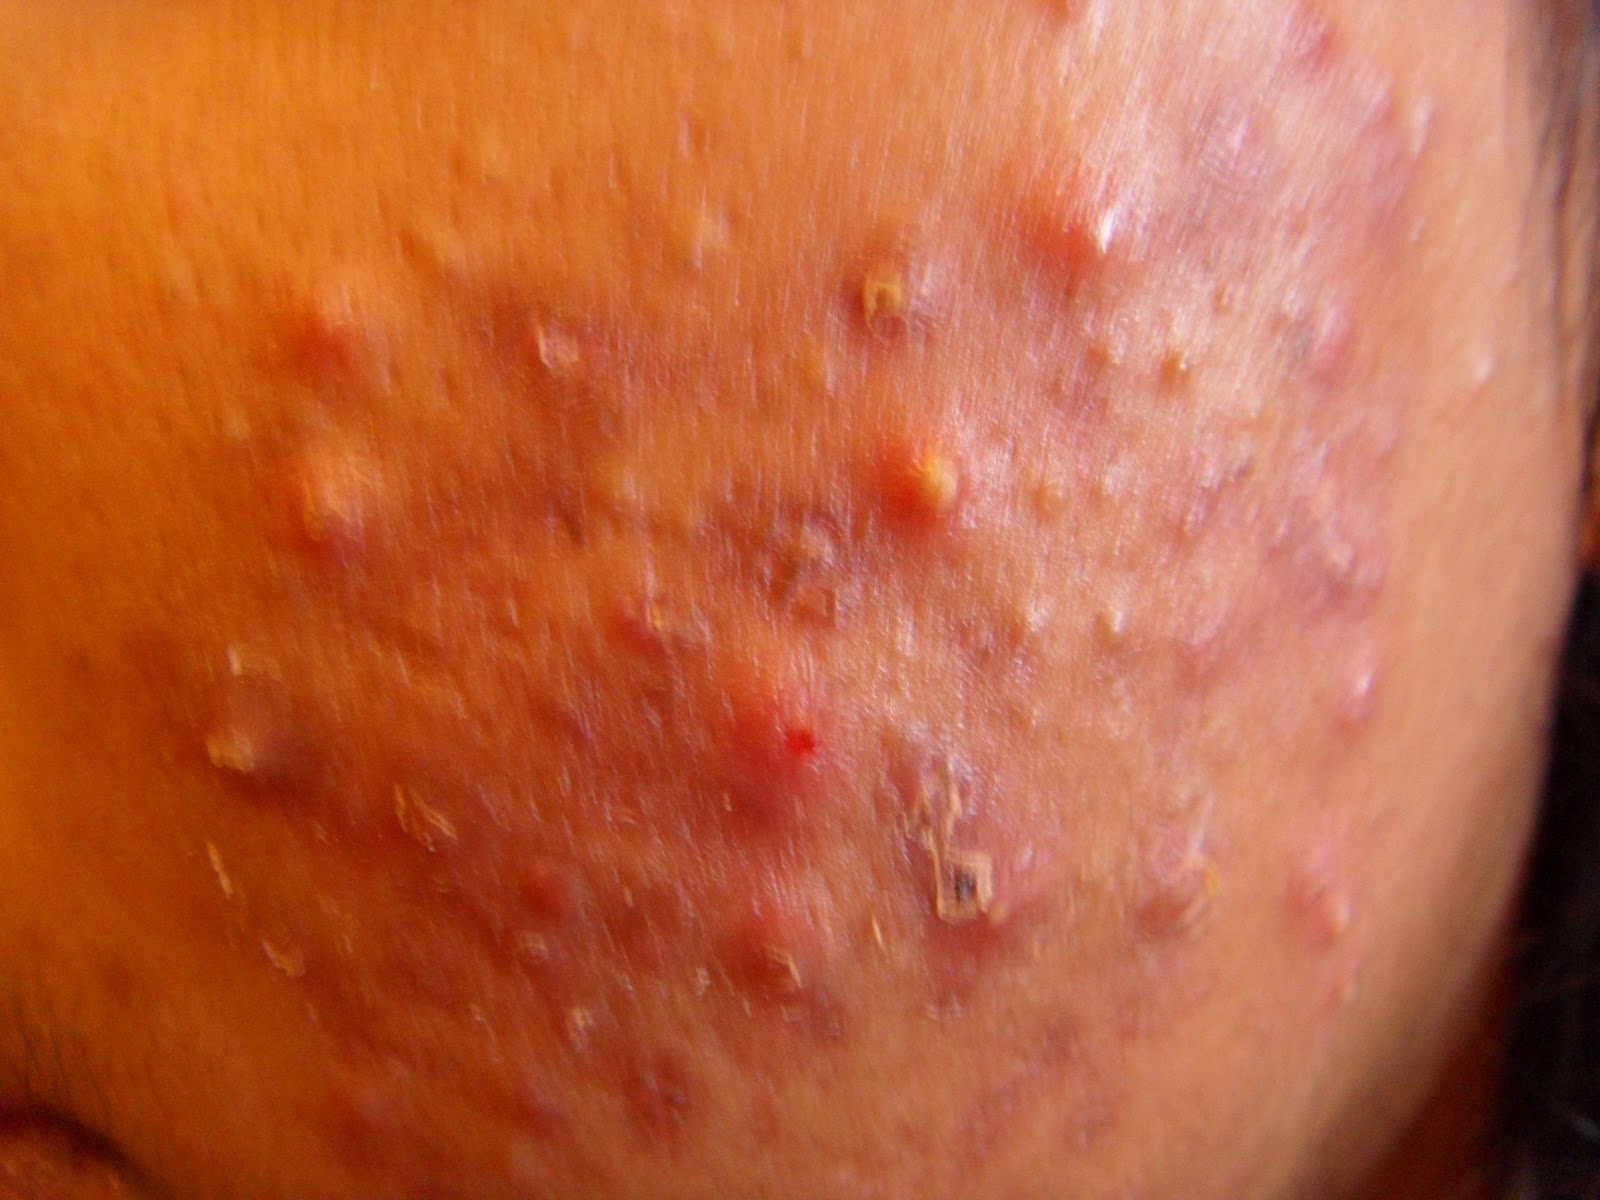 Image Gallery: Skin Problems | HowStuffWorks